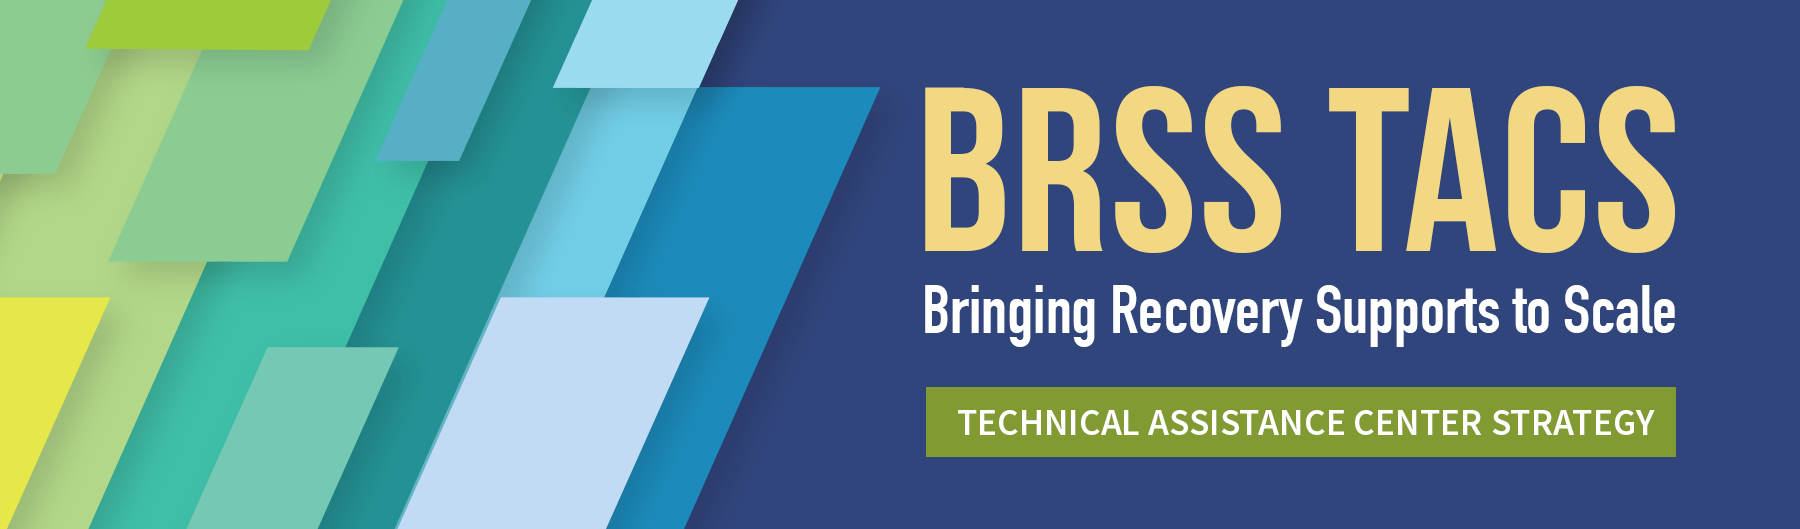 SAMHSA’s Bringing Recovery Supports to Scale Technical Assistance Center Strategy (BRSS TACS)